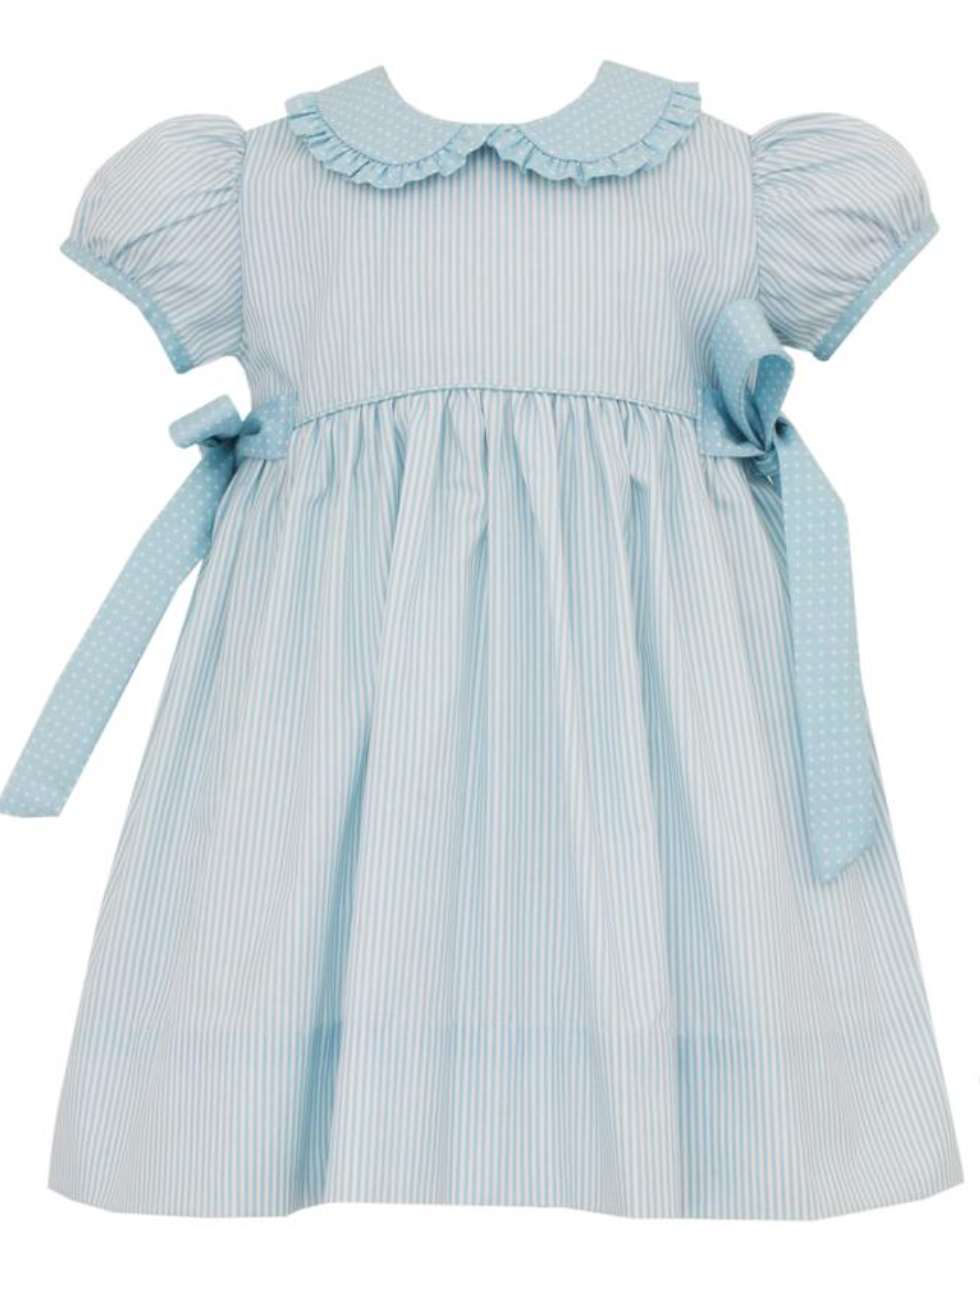 Blue Stripe Dress with Blue Dot Collar and Side Bows- Petit Bebe